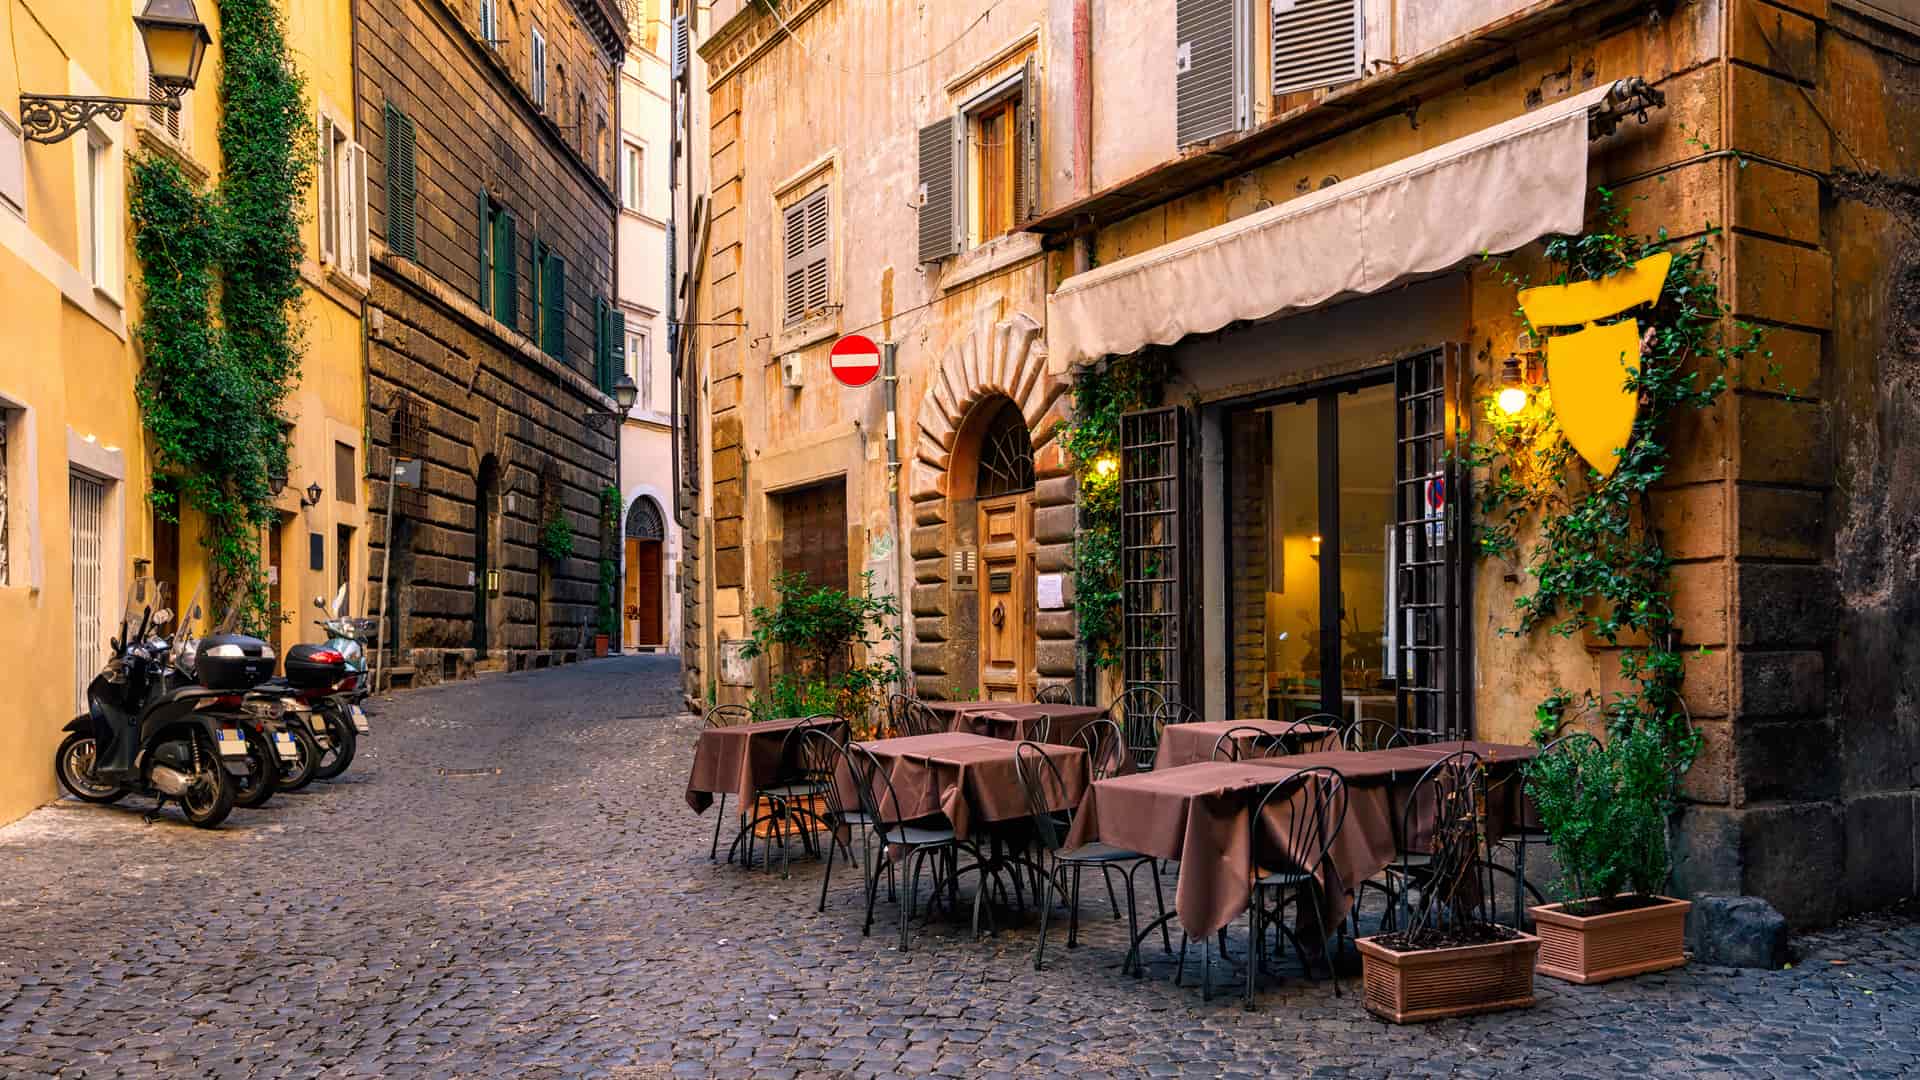 Old streets from Rome that represents the international deals in Italy